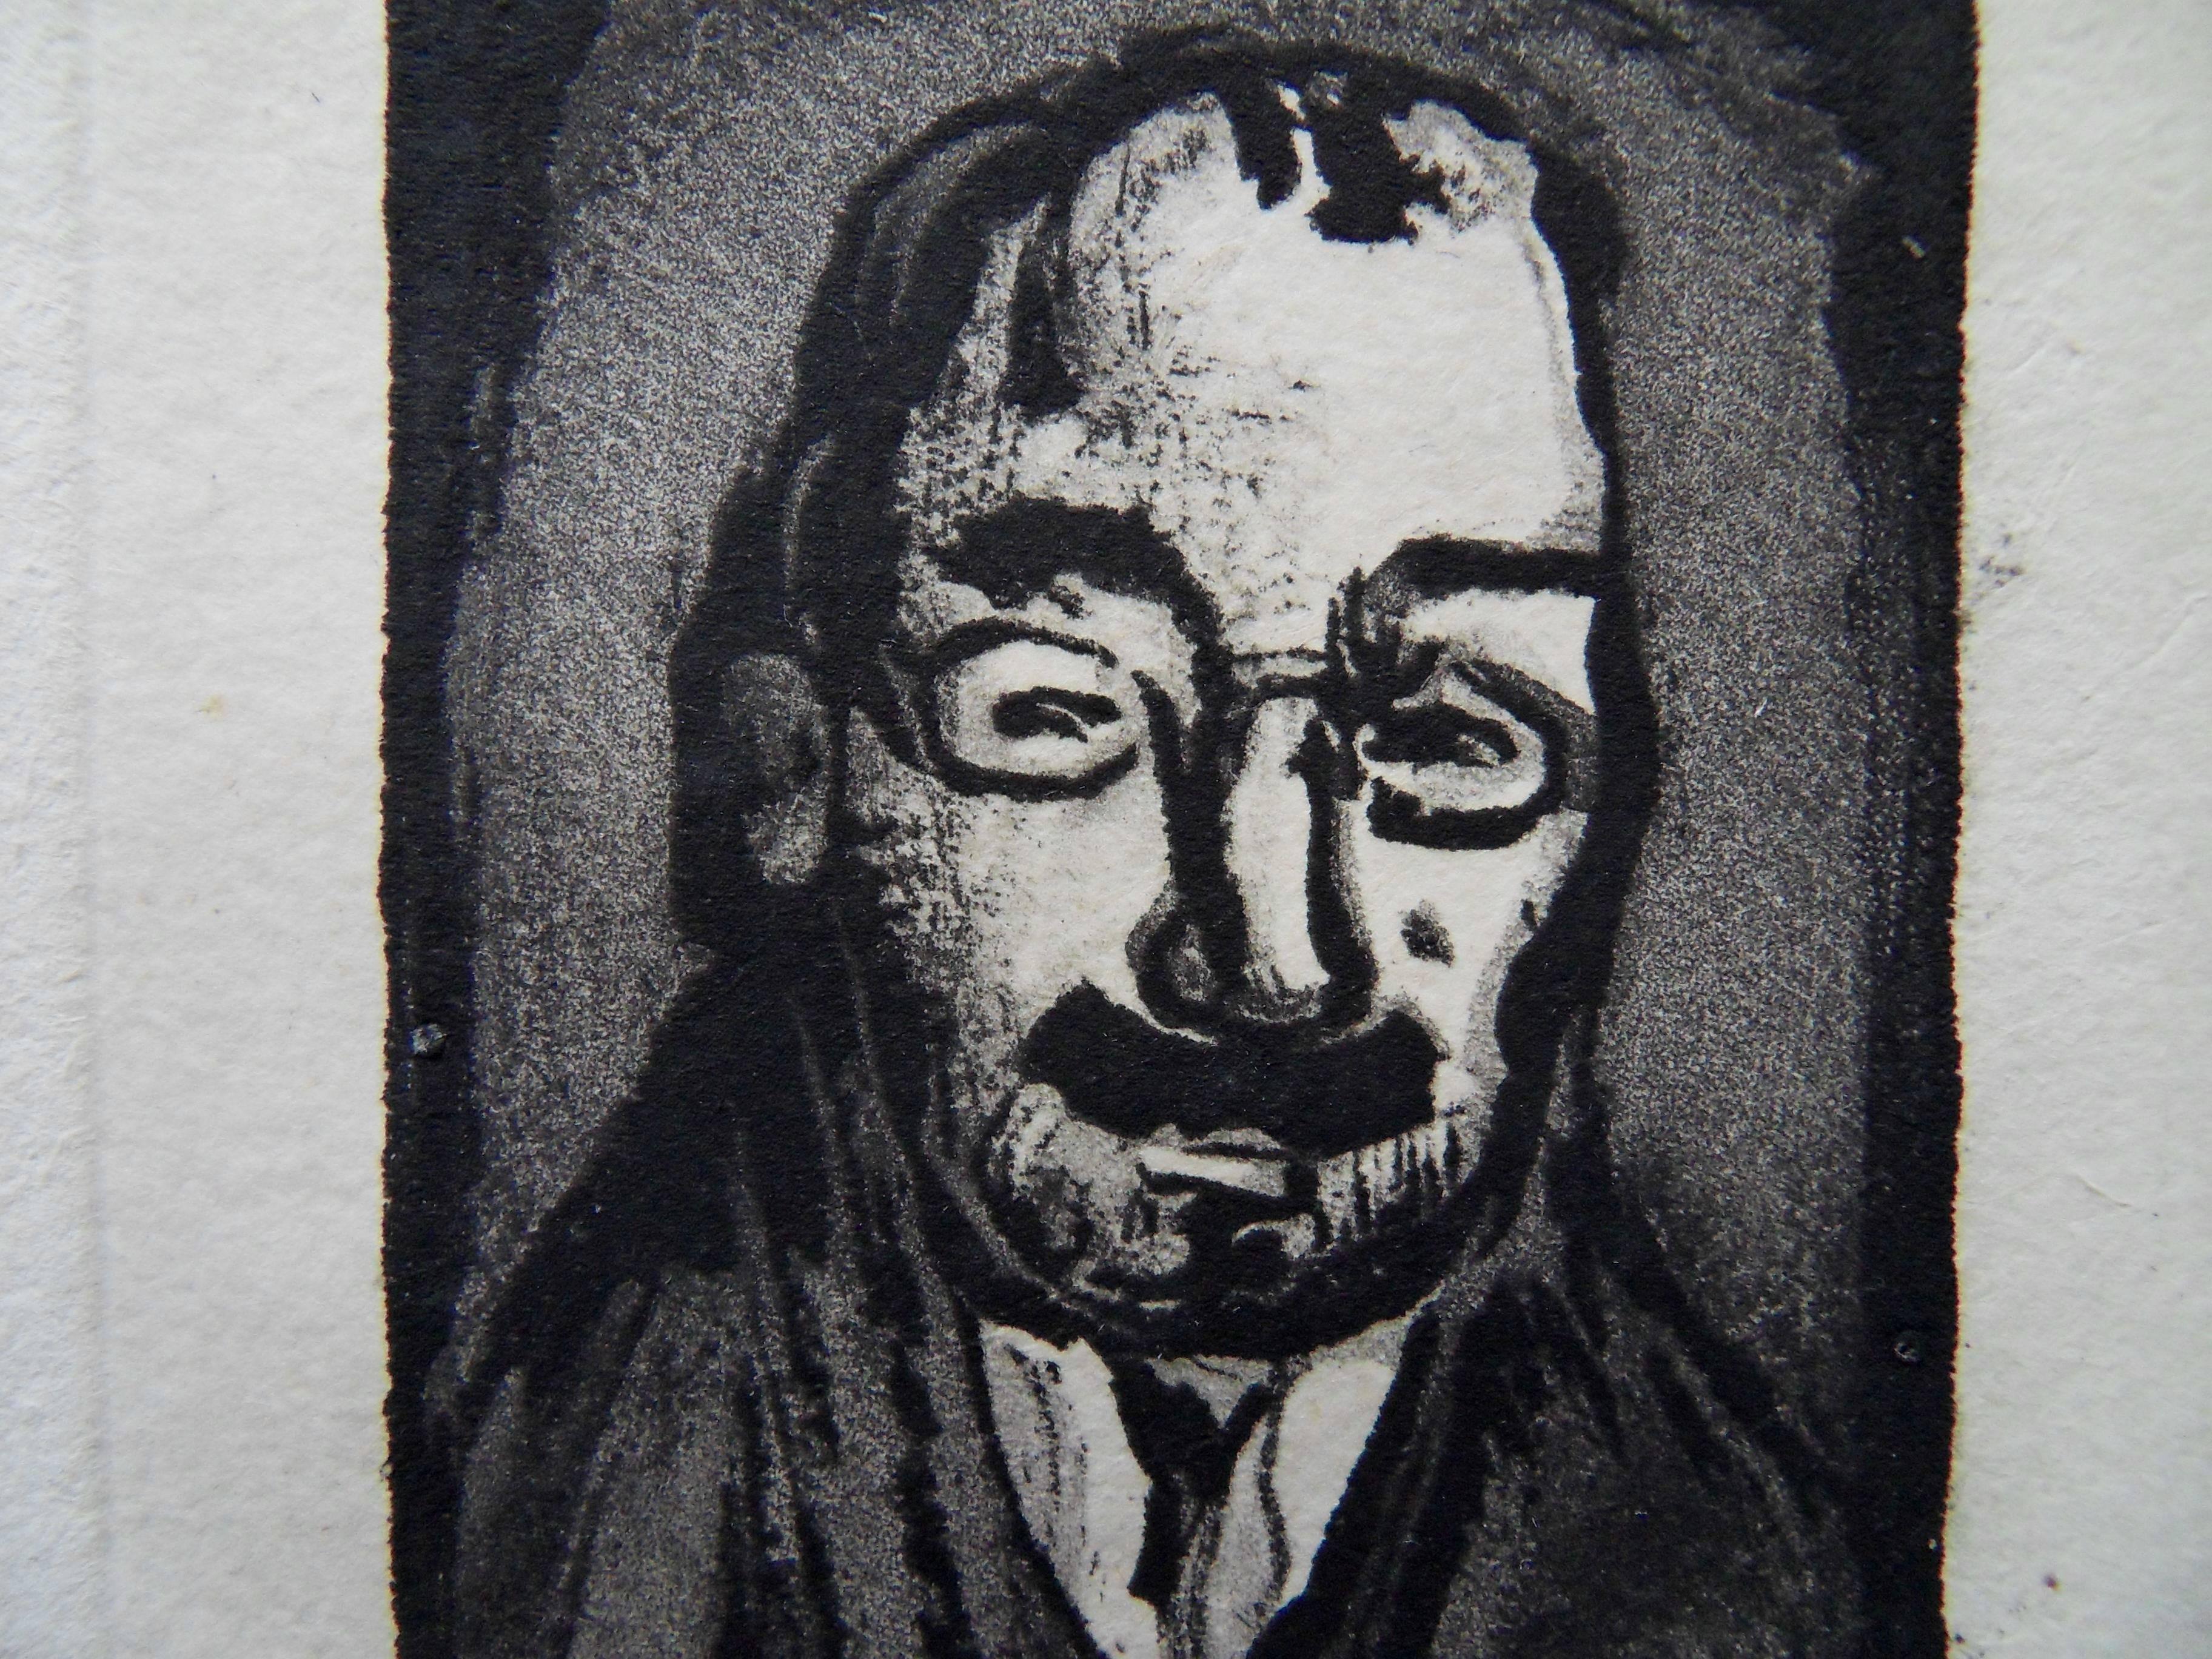 Man with Glasses - Original etching - 1929 - Gray Figurative Print by Georges Rouault